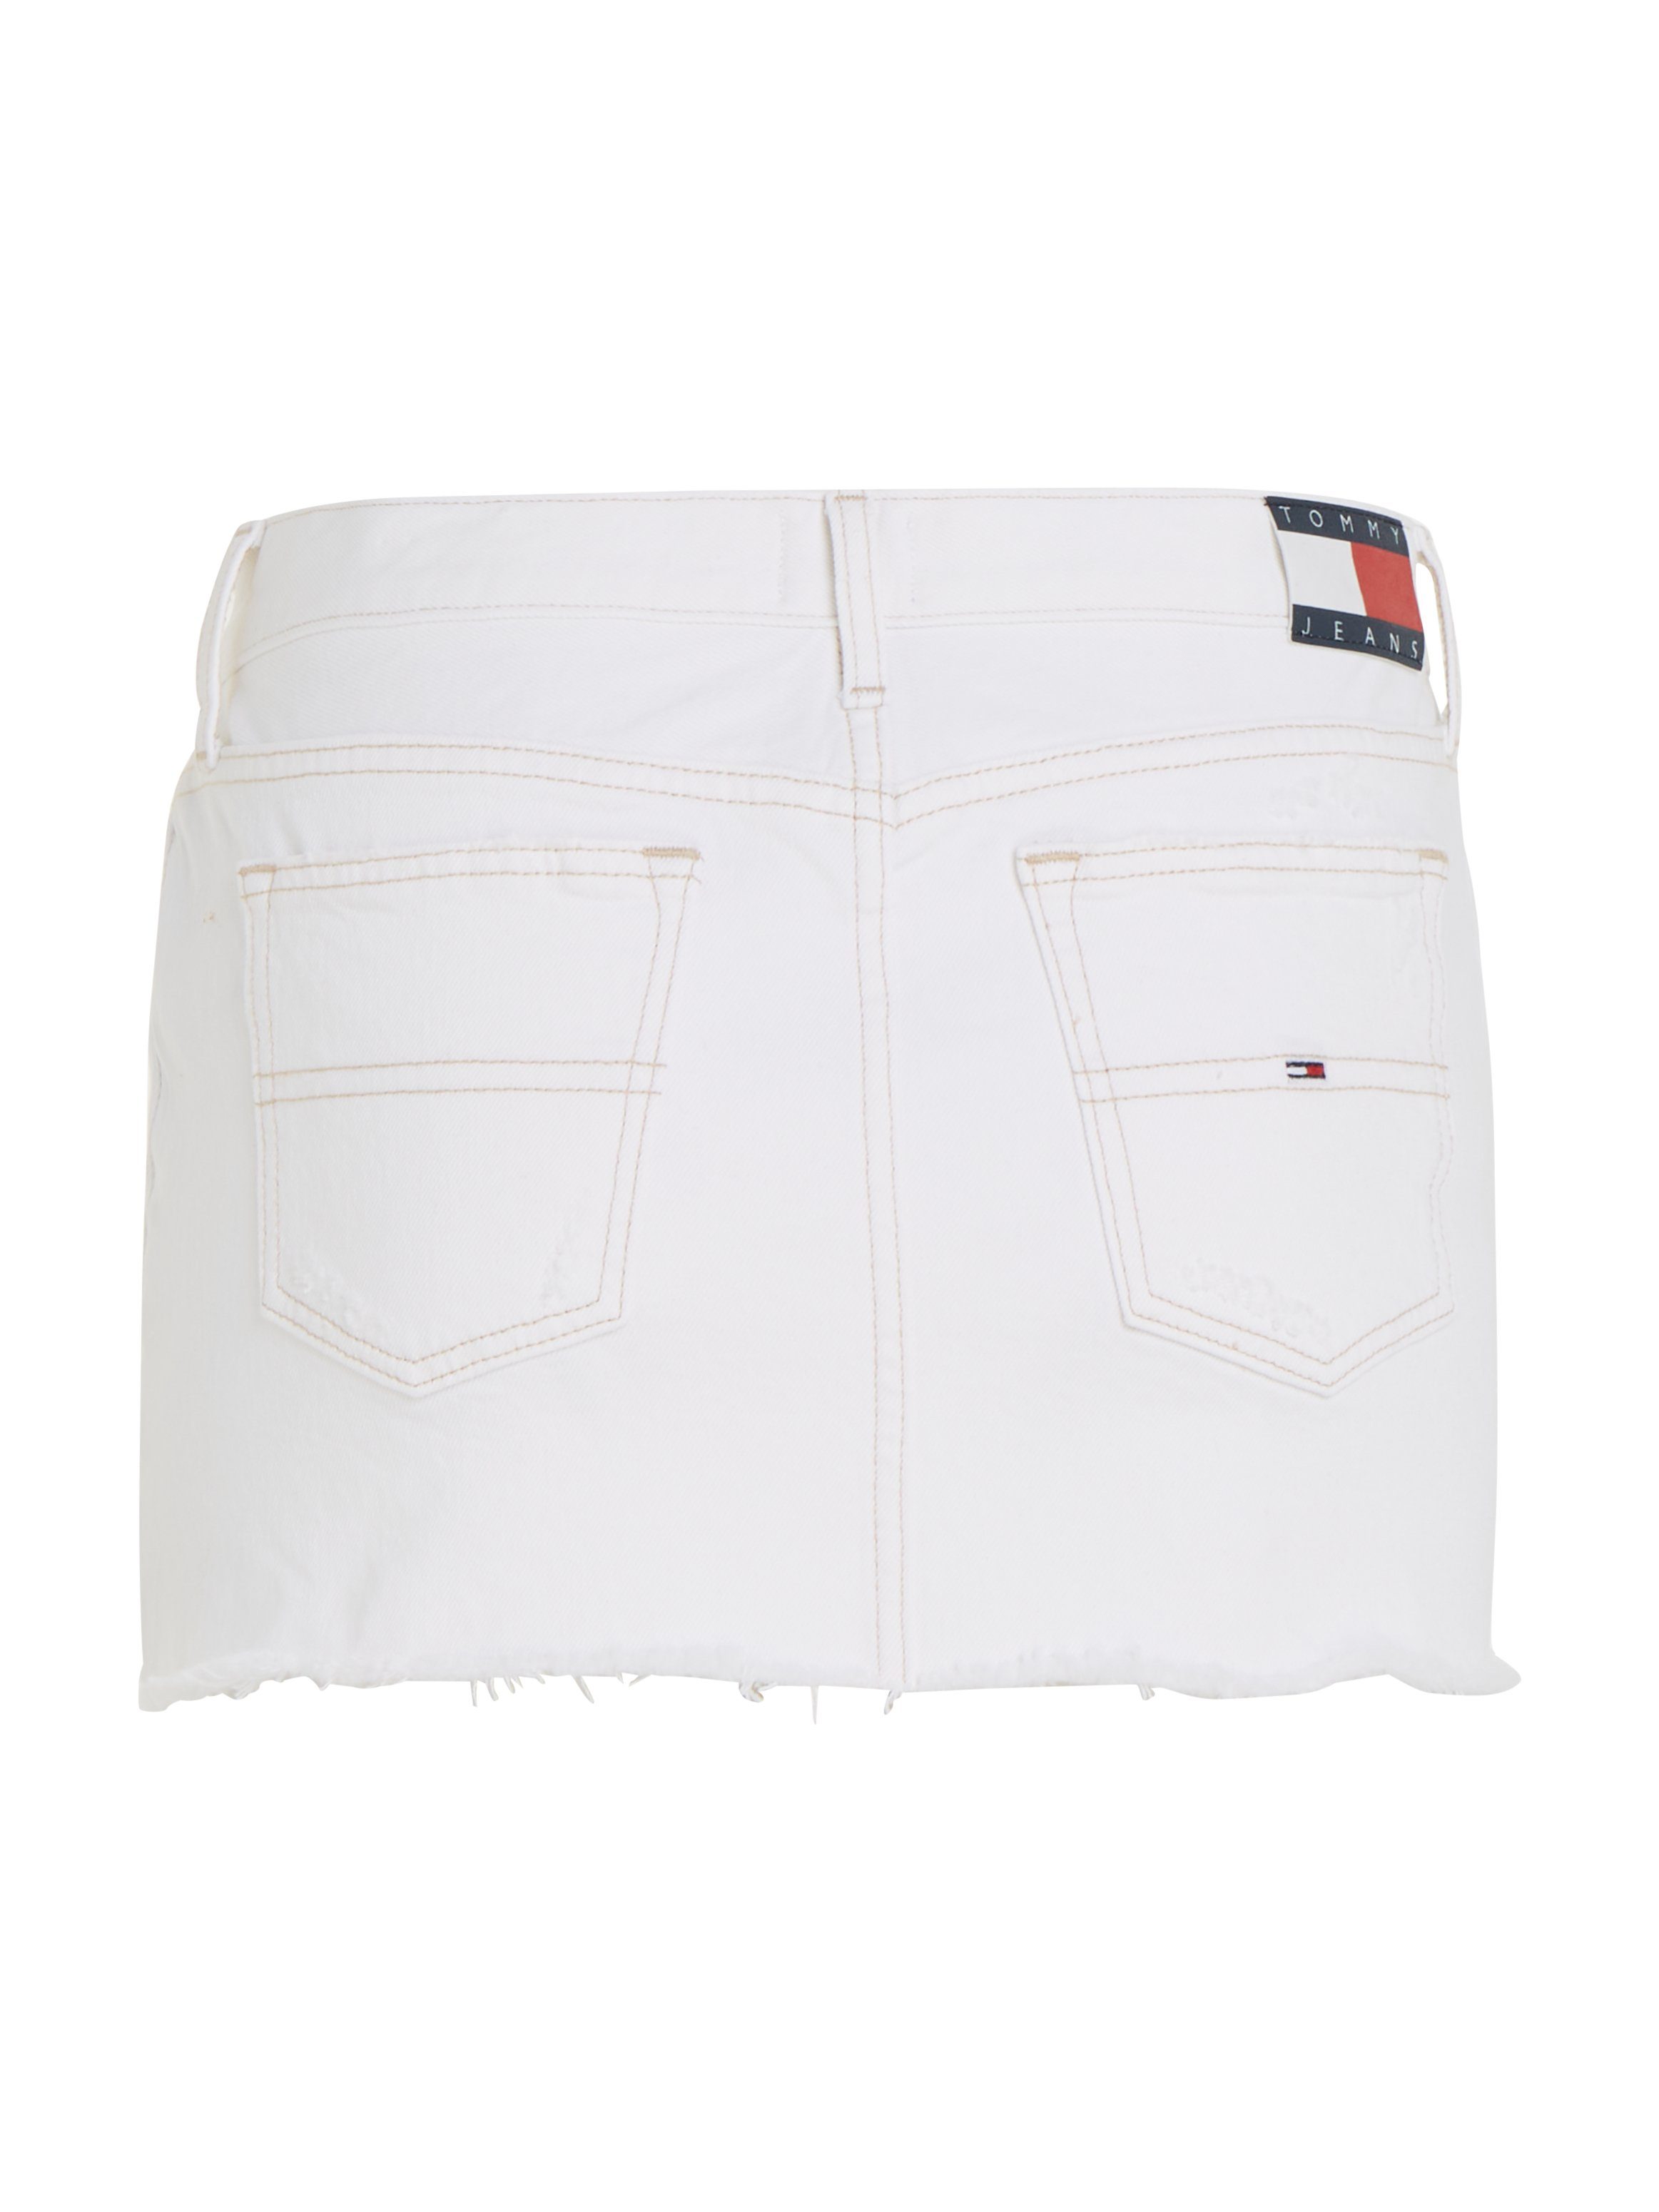 TOMMY JEANS rok